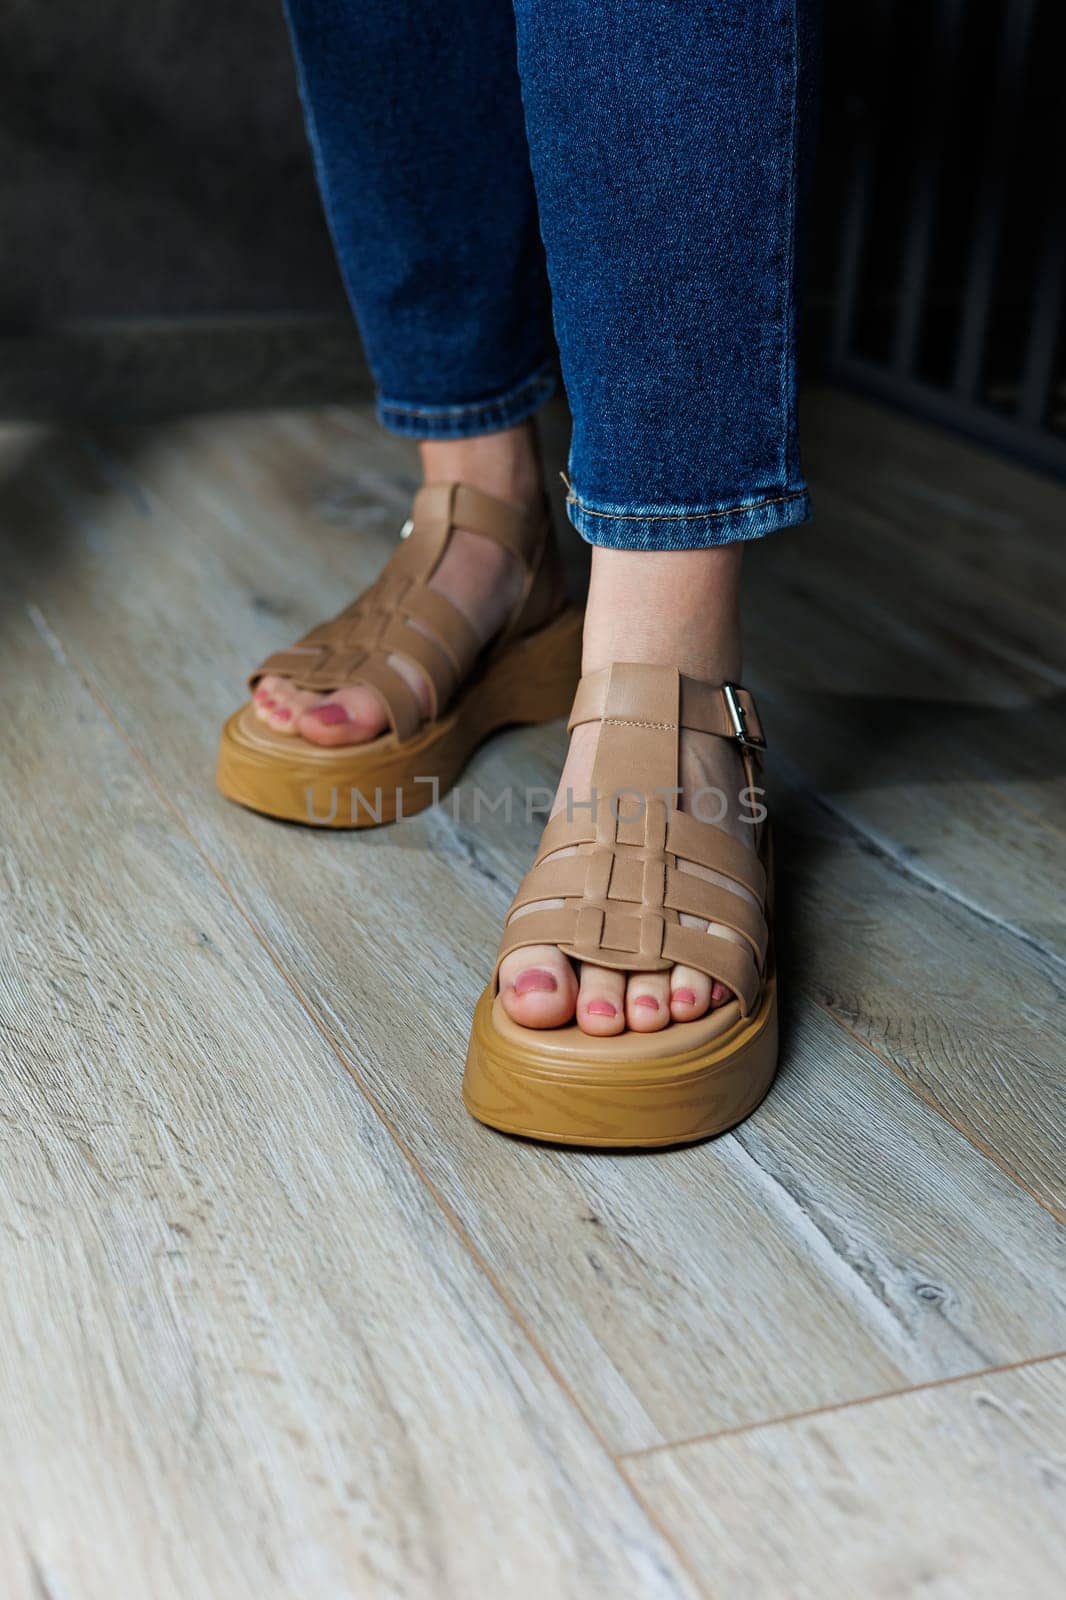 Women's sandals. Female feet close-up in casual brown sandals. Collection of summer women's sandals by Dmitrytph